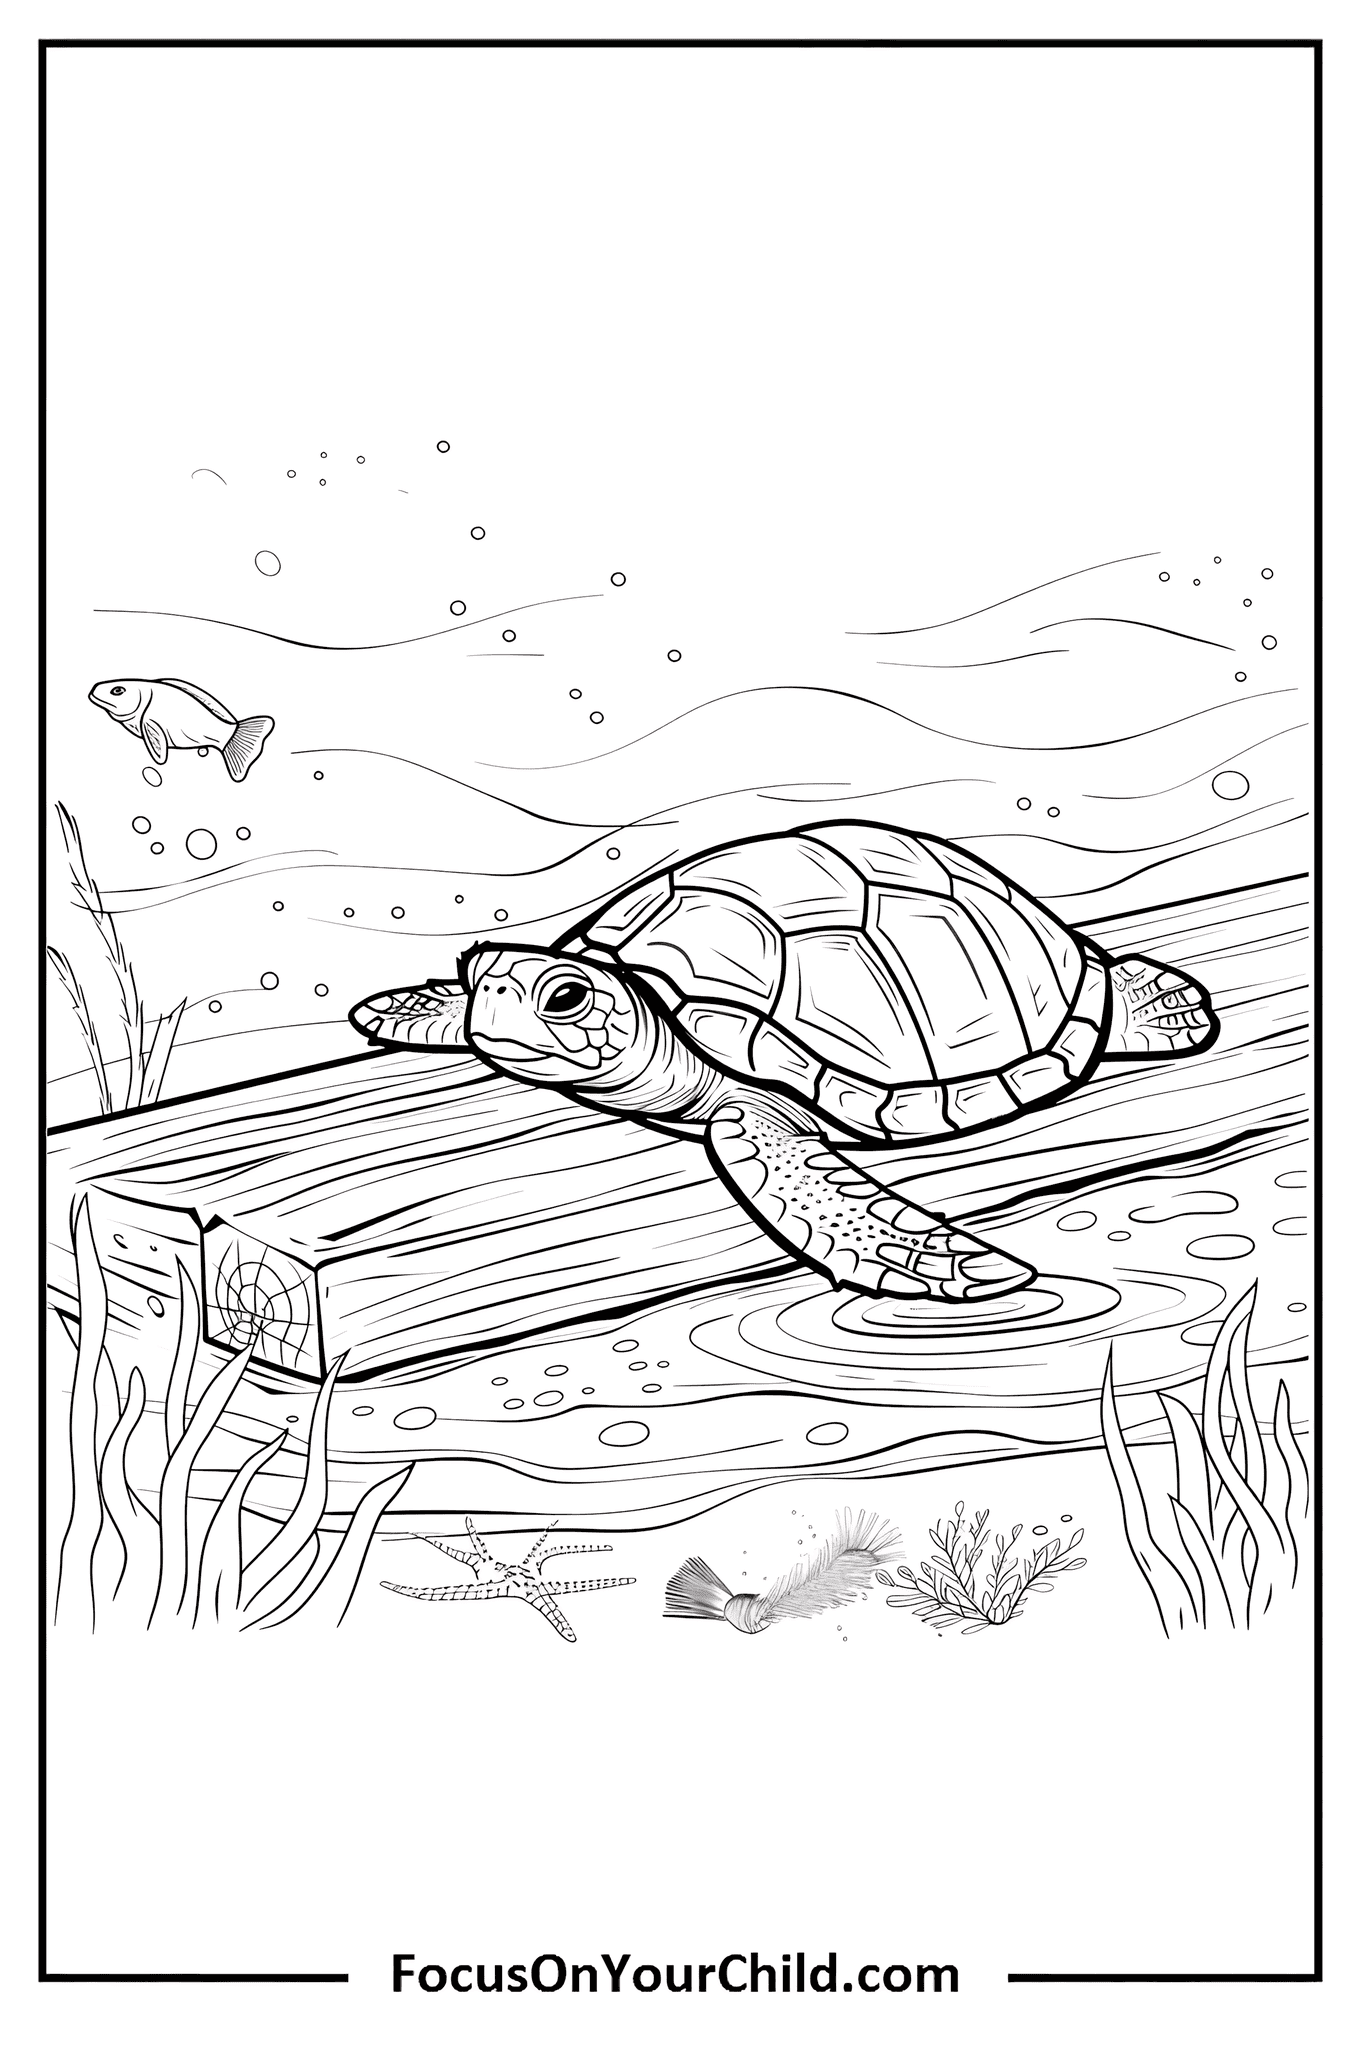 Detailed black-and-white underwater illustration featuring a turtle, fish, bubbles, and marine vegetation.